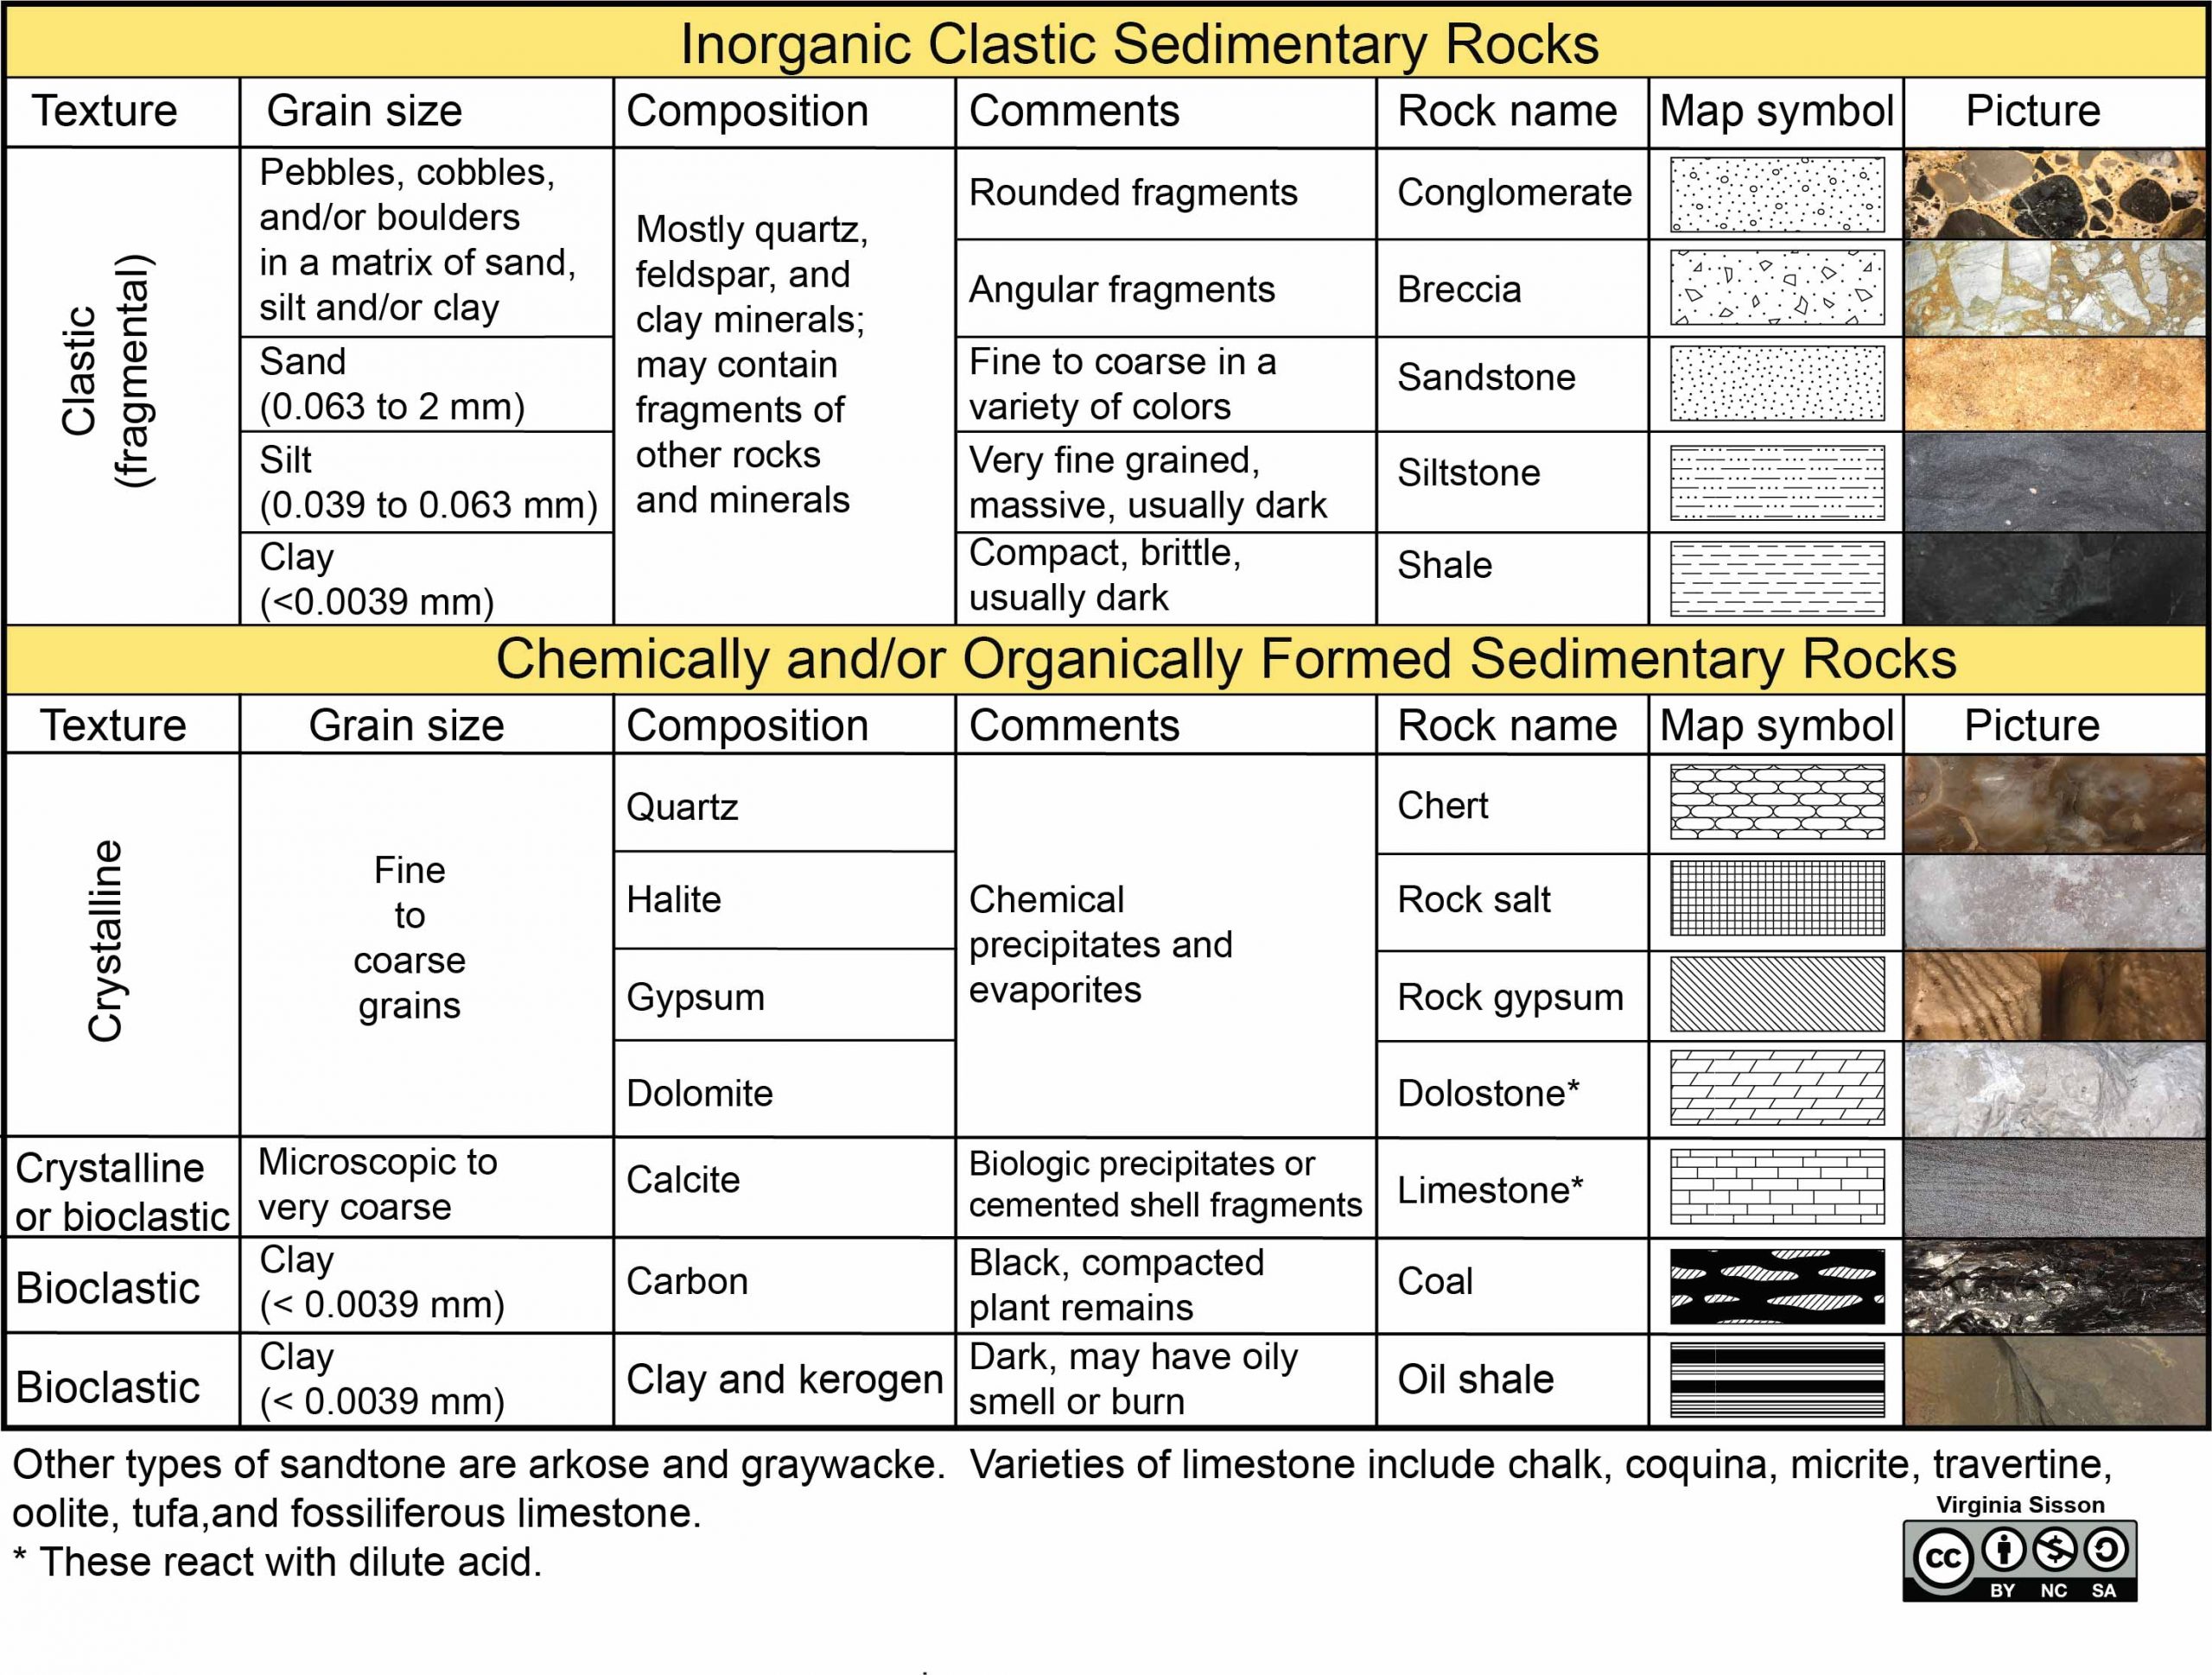 Sedimentary rock classification table. Separates inorganic clastic rocks from chemically and organically formed rocks.